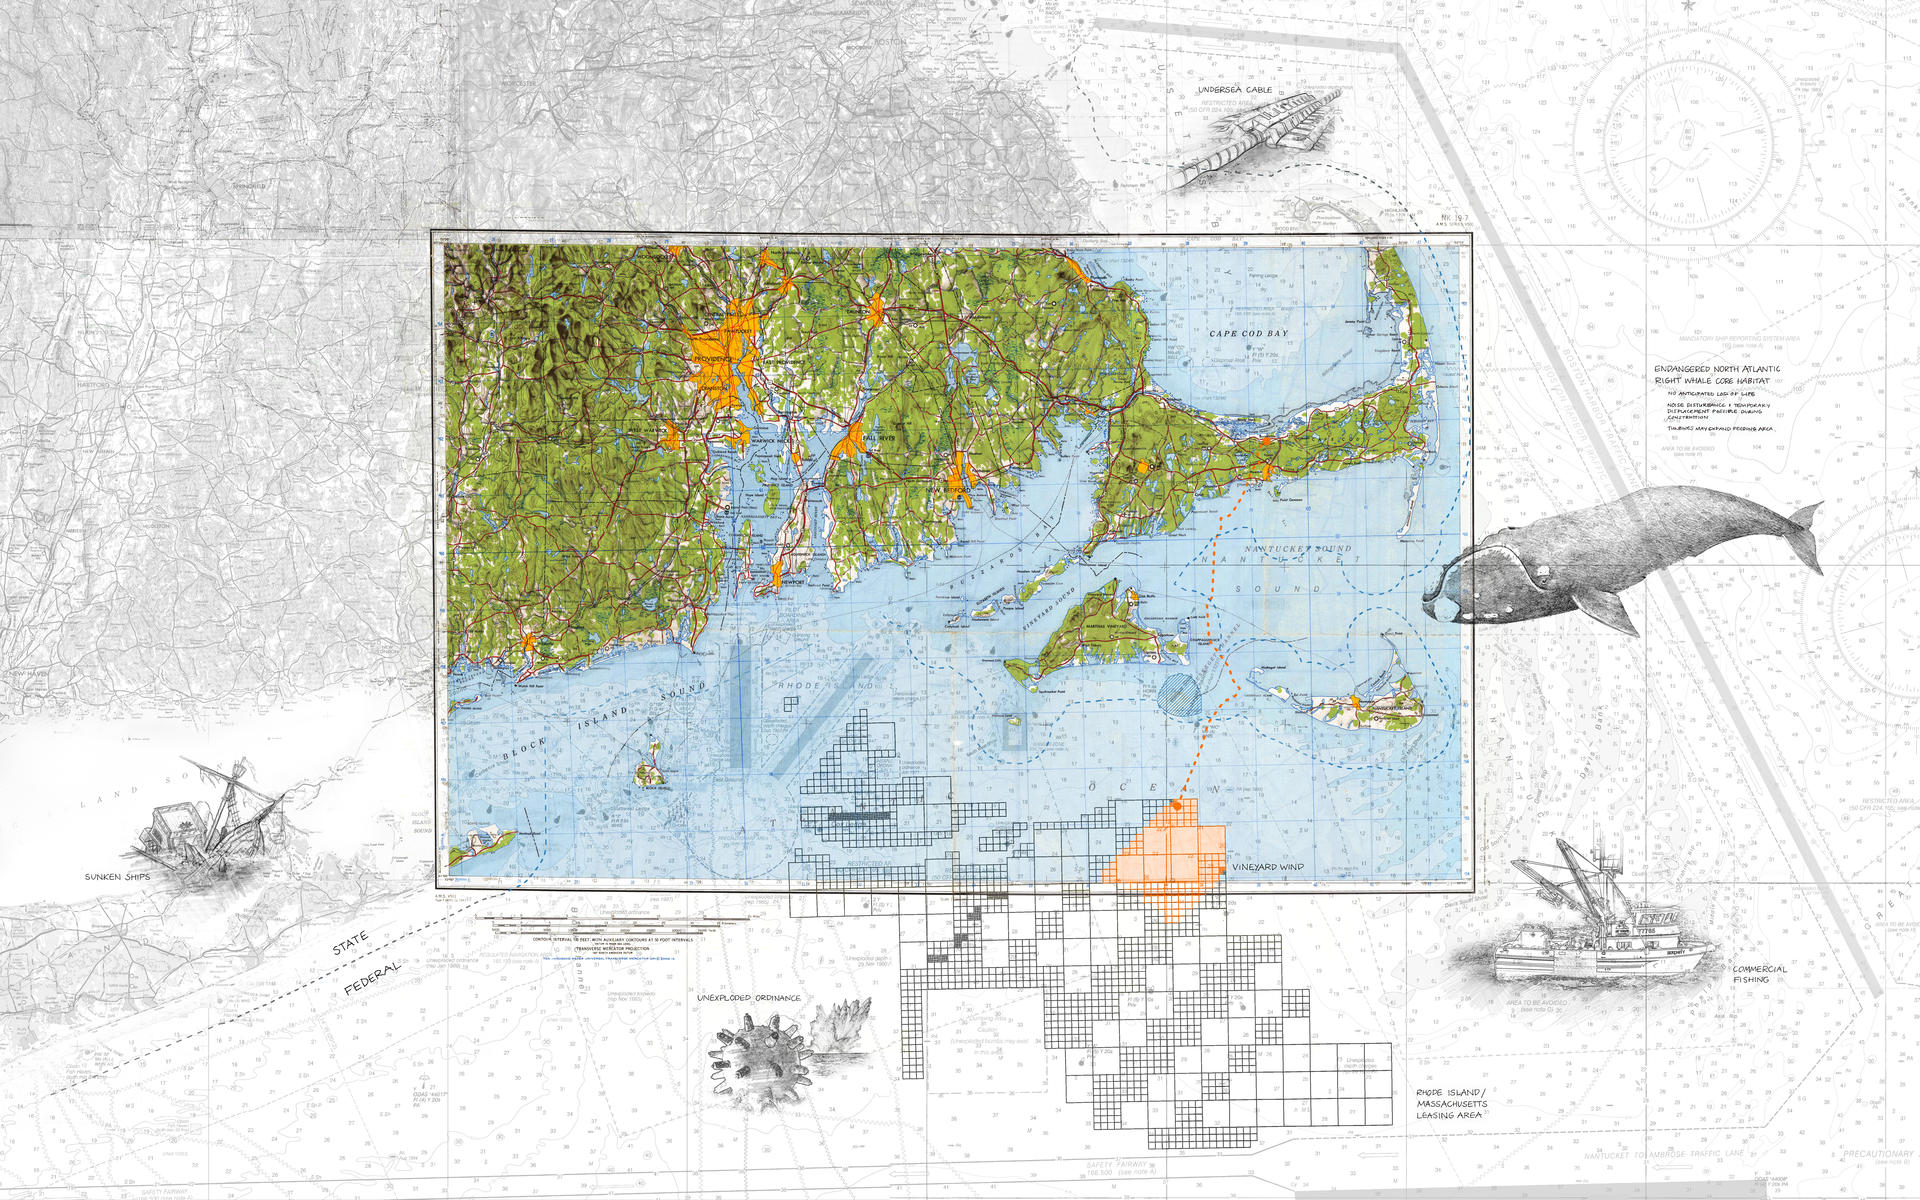 Collaged geophysical and nautical maps are overlaid with sketches of urbanized sea operations like unexploded bombs, sunken ships, and sea highways